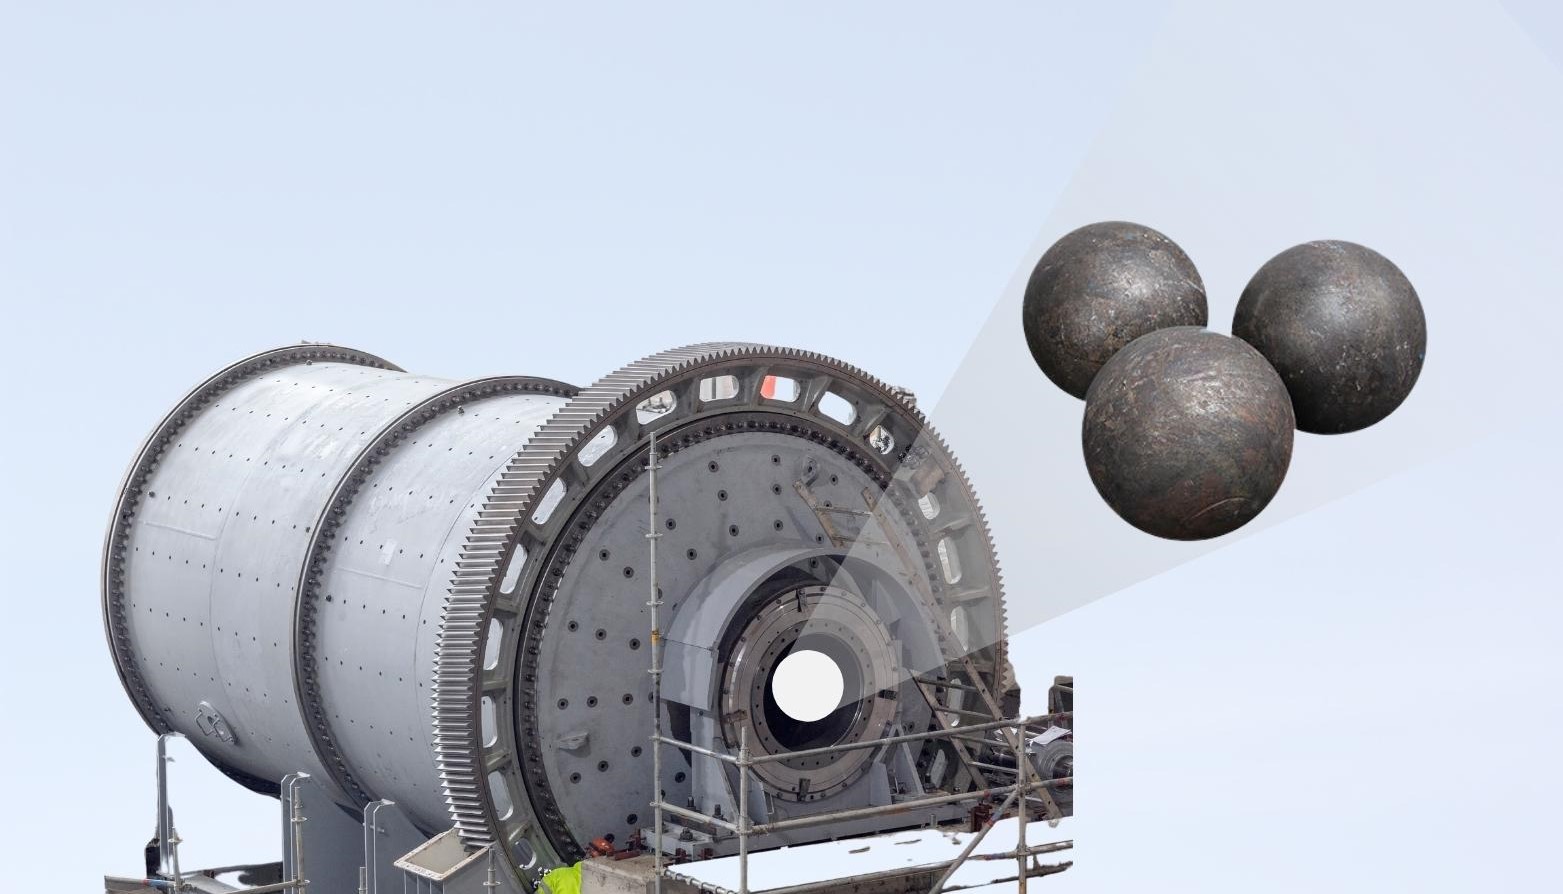 A ball from a ball mill. These balls were used to grind the material inside. 